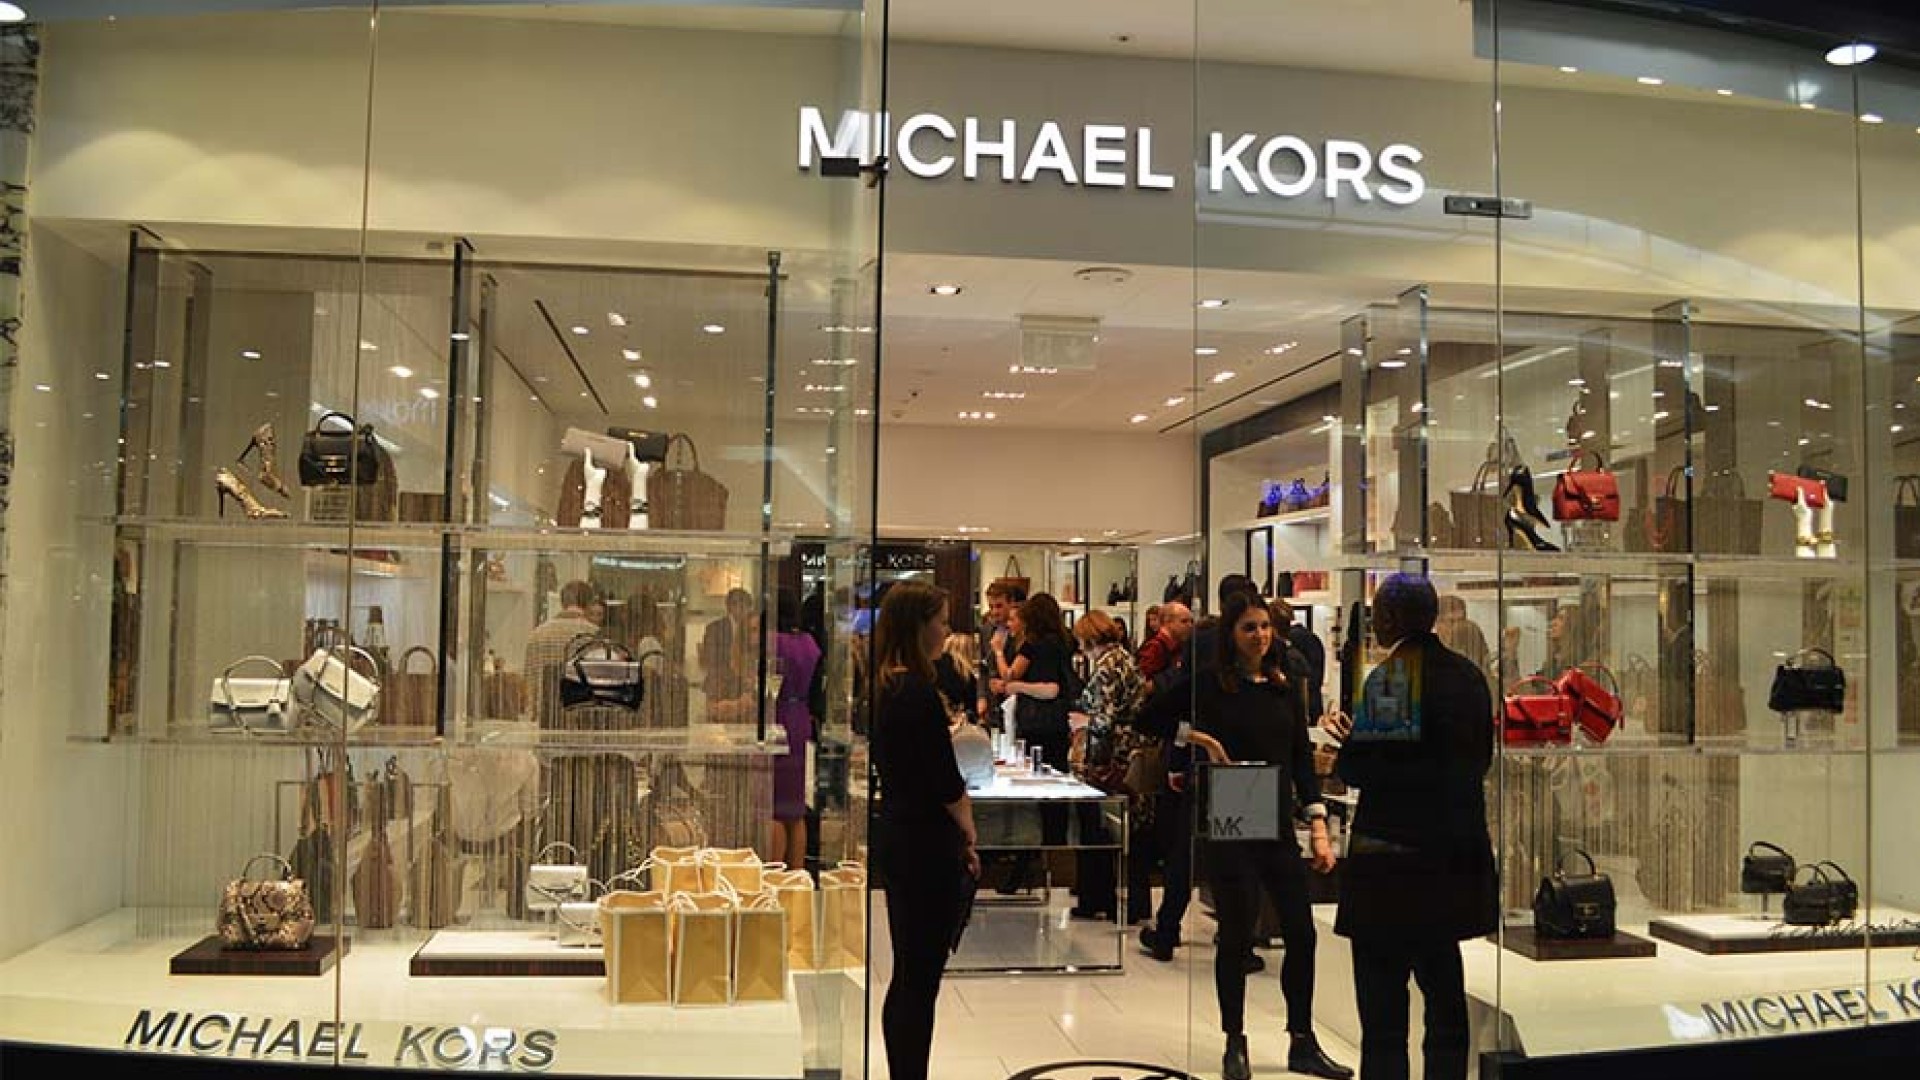 An evening of style at the Michael Kors Canary Wharf store | Square Mile